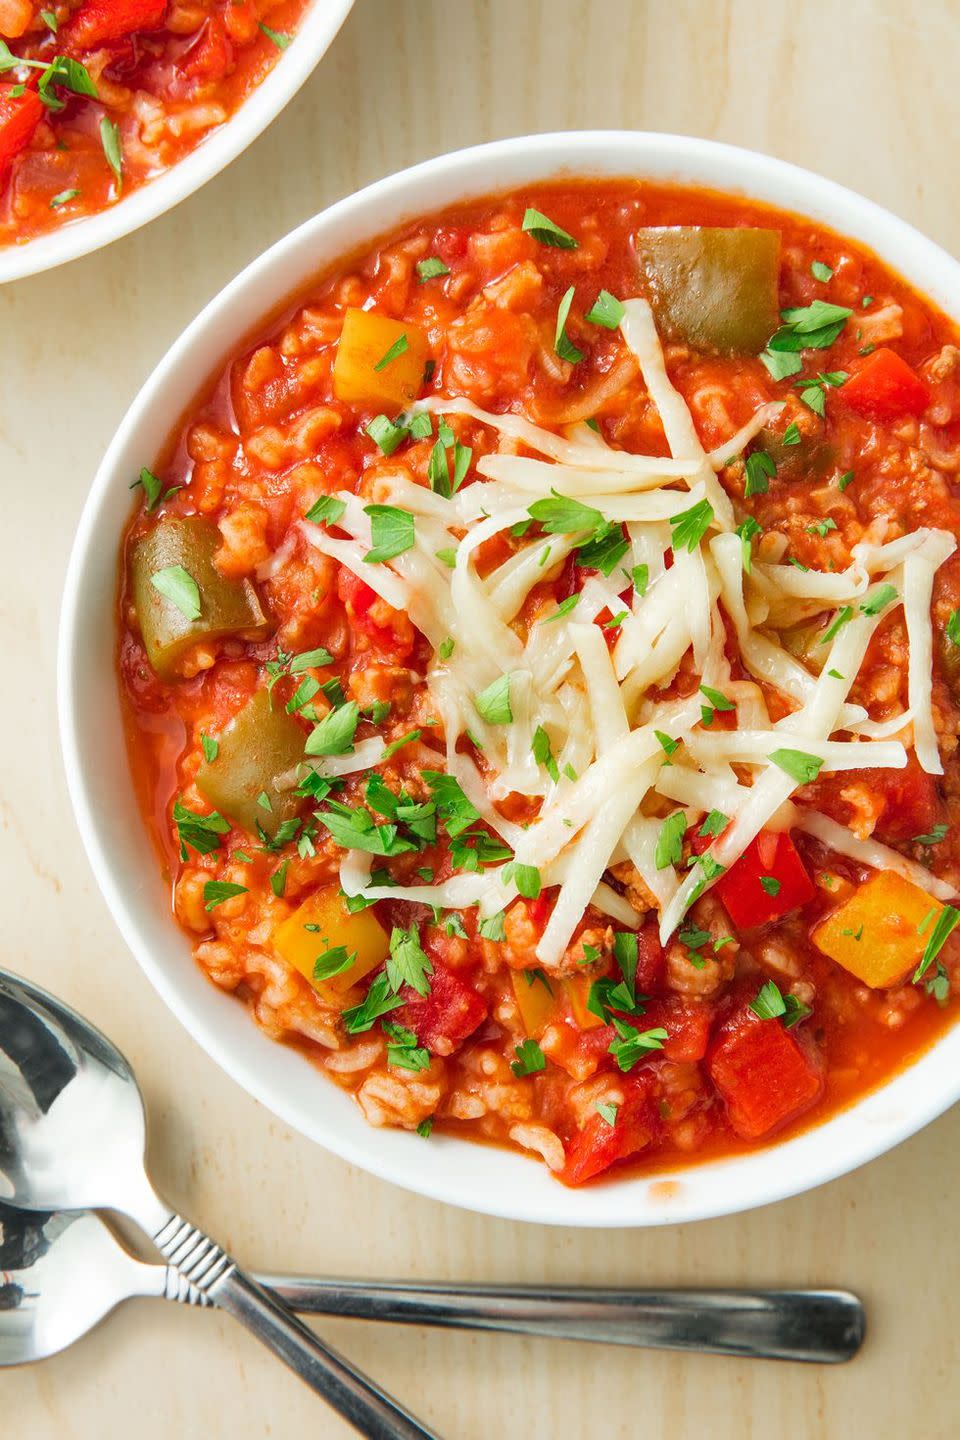 <p>This soup has everything you like about a <a href="https://www.delish.com/cooking/recipe-ideas/a23014857/classic-stuffed-peppers-recipe/" rel="nofollow noopener" target="_blank" data-ylk="slk:classic stuffed pepper" class="link ">classic stuffed pepper</a>—<a href="https://www.delish.com/cooking/g1703/ground-beef-dishes/" rel="nofollow noopener" target="_blank" data-ylk="slk:ground beef" class="link ">ground beef</a>, <a href="https://www.delish.com/cooking/recipe-ideas/g129/rice-recipes/" rel="nofollow noopener" target="_blank" data-ylk="slk:rice" class="link ">rice</a>, <a href="https://www.delish.com/cooking/g1448/quick-easy-tomato-recipes/" rel="nofollow noopener" target="_blank" data-ylk="slk:tomatoes" class="link ">tomatoes</a>, and CHEESE. It's perfect on its own or served with <a href="https://www.delish.com/cooking/recipe-ideas/a20079535/best-homemade-cornbread-recipe/" rel="nofollow noopener" target="_blank" data-ylk="slk:cornbread" class="link ">cornbread</a> or a <a href="https://www.delish.com/cooking/g1845/winter-salads/" rel="nofollow noopener" target="_blank" data-ylk="slk:salad" class="link ">salad</a>. Feel free to switch things up too (<a href="https://www.delish.com/cooking/g2144/ground-turkey-recipes/" rel="nofollow noopener" target="_blank" data-ylk="slk:ground turkey" class="link ">ground turkey</a> for beef, <a href="https://www.delish.com/cooking/recipe-ideas/a20136672/how-to-cook-quinoa/" rel="nofollow noopener" target="_blank" data-ylk="slk:quinoa" class="link ">quinoa</a> for rice, etc.).</p><p>Get the <strong><a href="https://www.delish.com/cooking/recipe-ideas/a21925560/best-stuffed-bell-pepper-soup-recipe/" rel="nofollow noopener" target="_blank" data-ylk="slk:Stuffed Pepper Soup recipe" class="link ">Stuffed Pepper Soup recipe</a>.</strong></p>